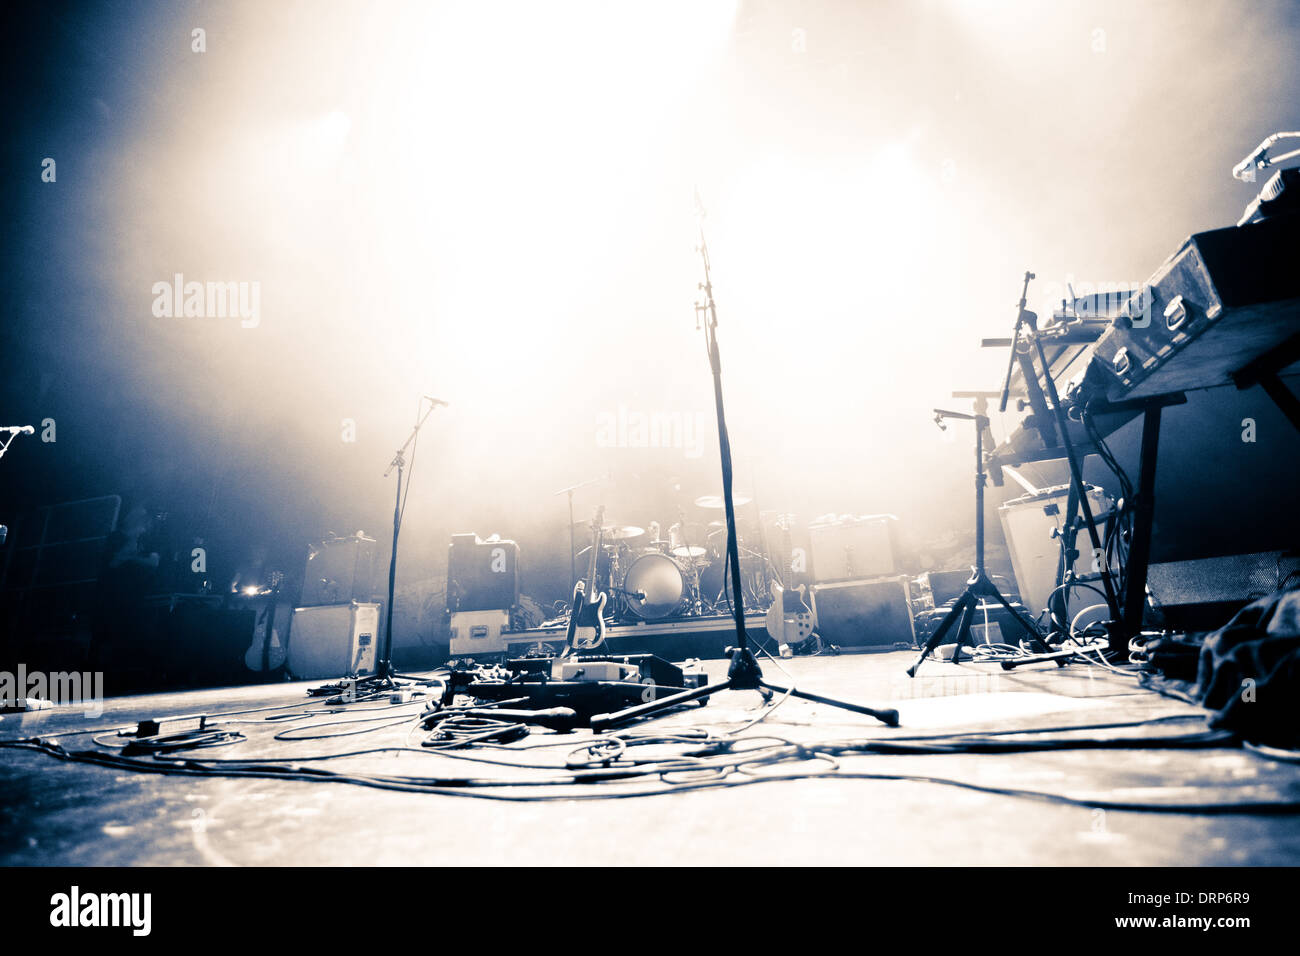 Empty illuminated stage with drumkit, guitar and microphones Stock Photo